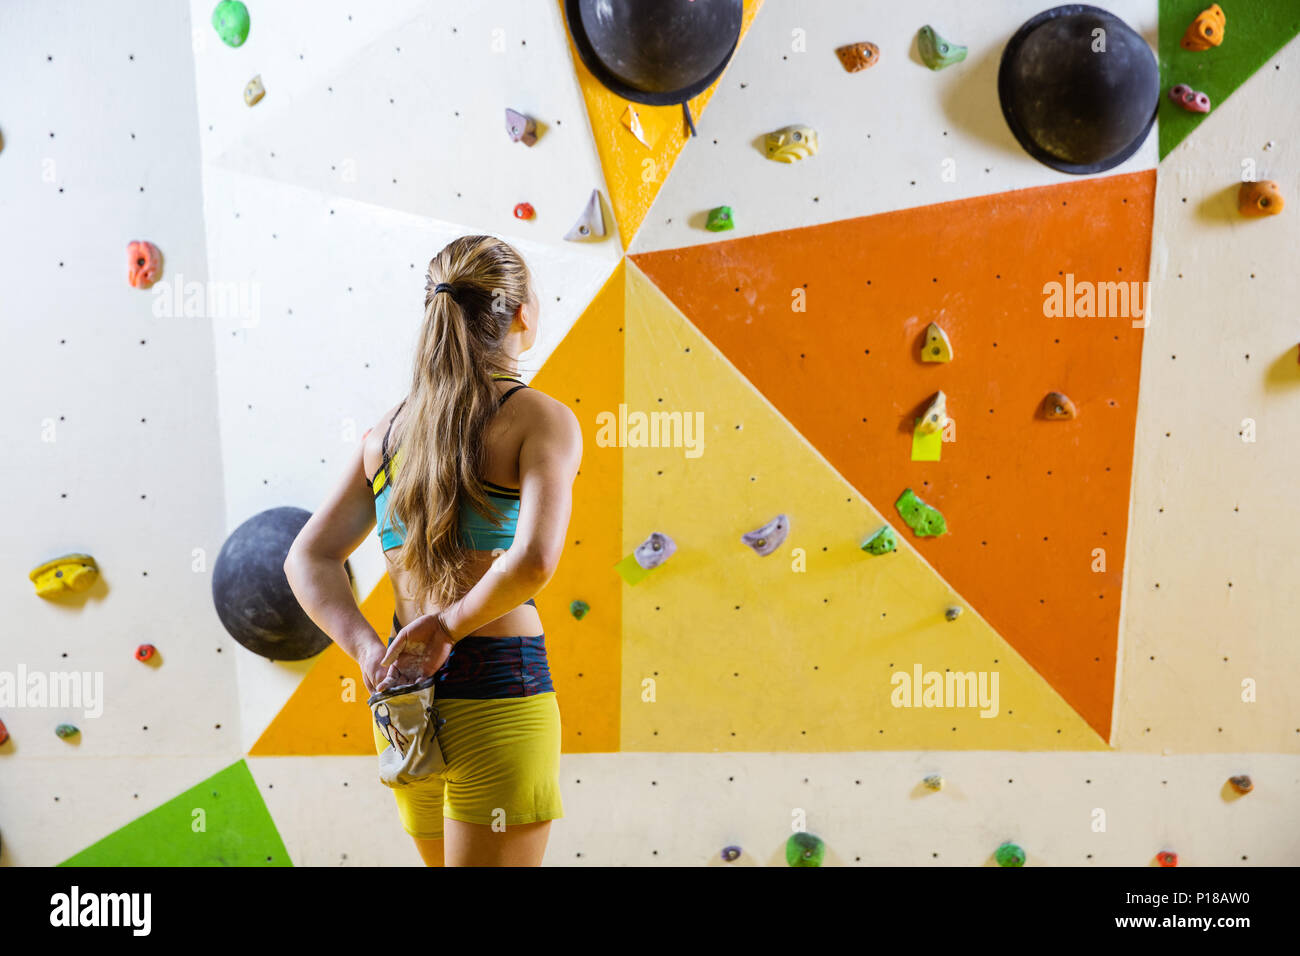 Young woman putting chalk on hands and looking at bouldering problem she is going to climb. In indoor climbing gym. Stock Photo